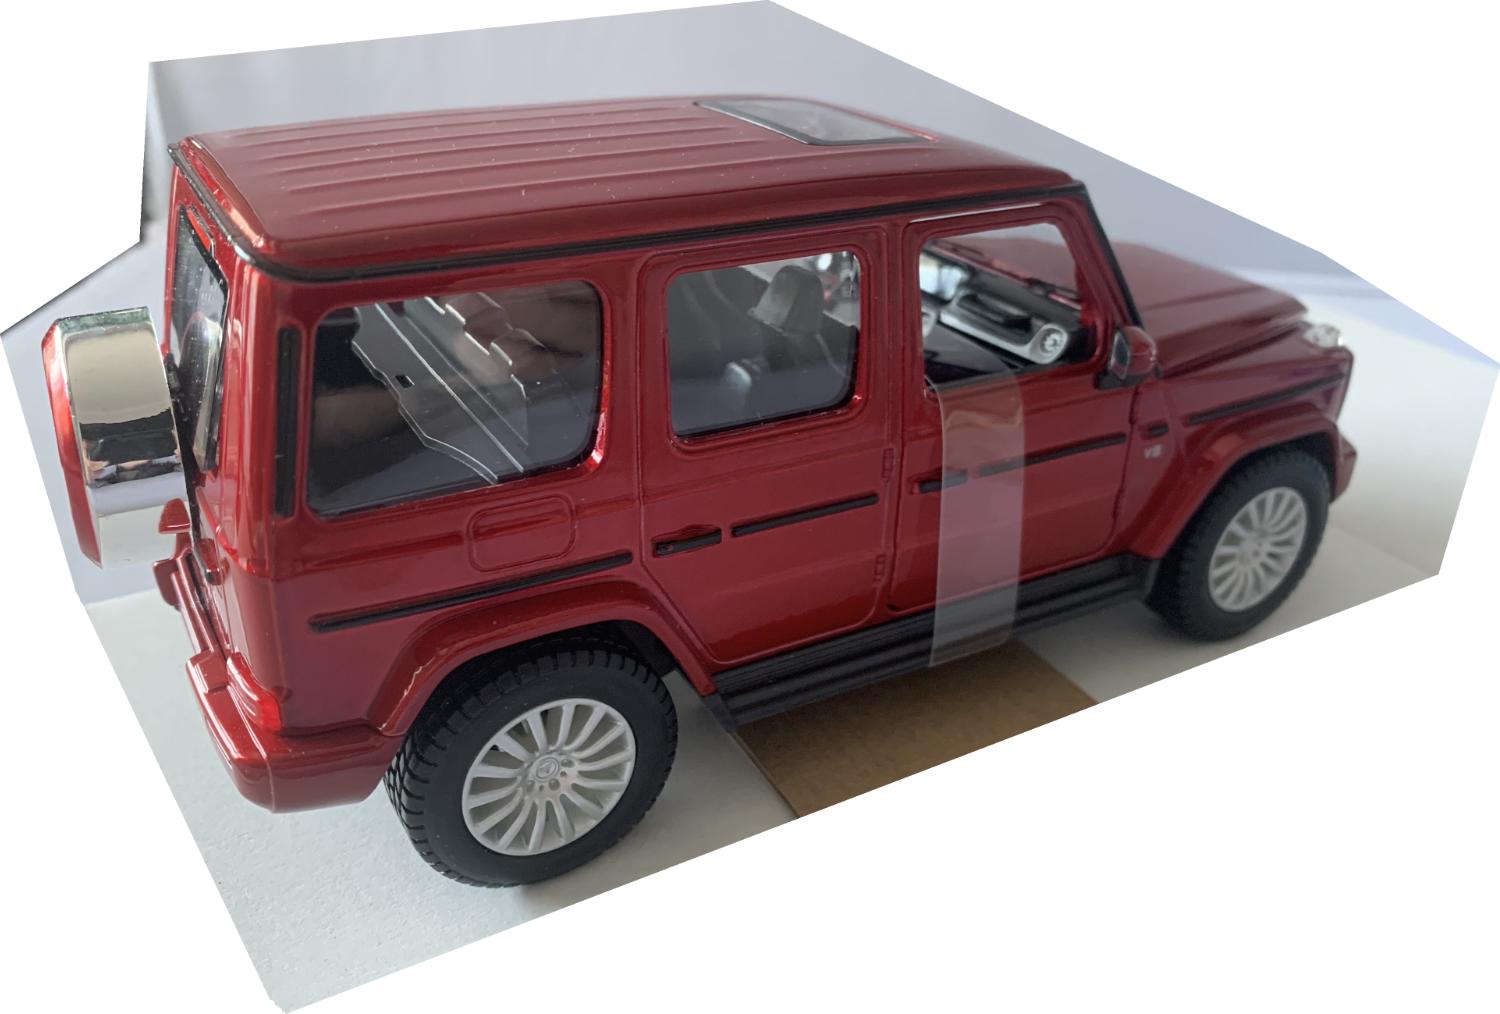 Mercedes Benz G Class 2019 in metallic red 1:24 scale diecast model from Maisto